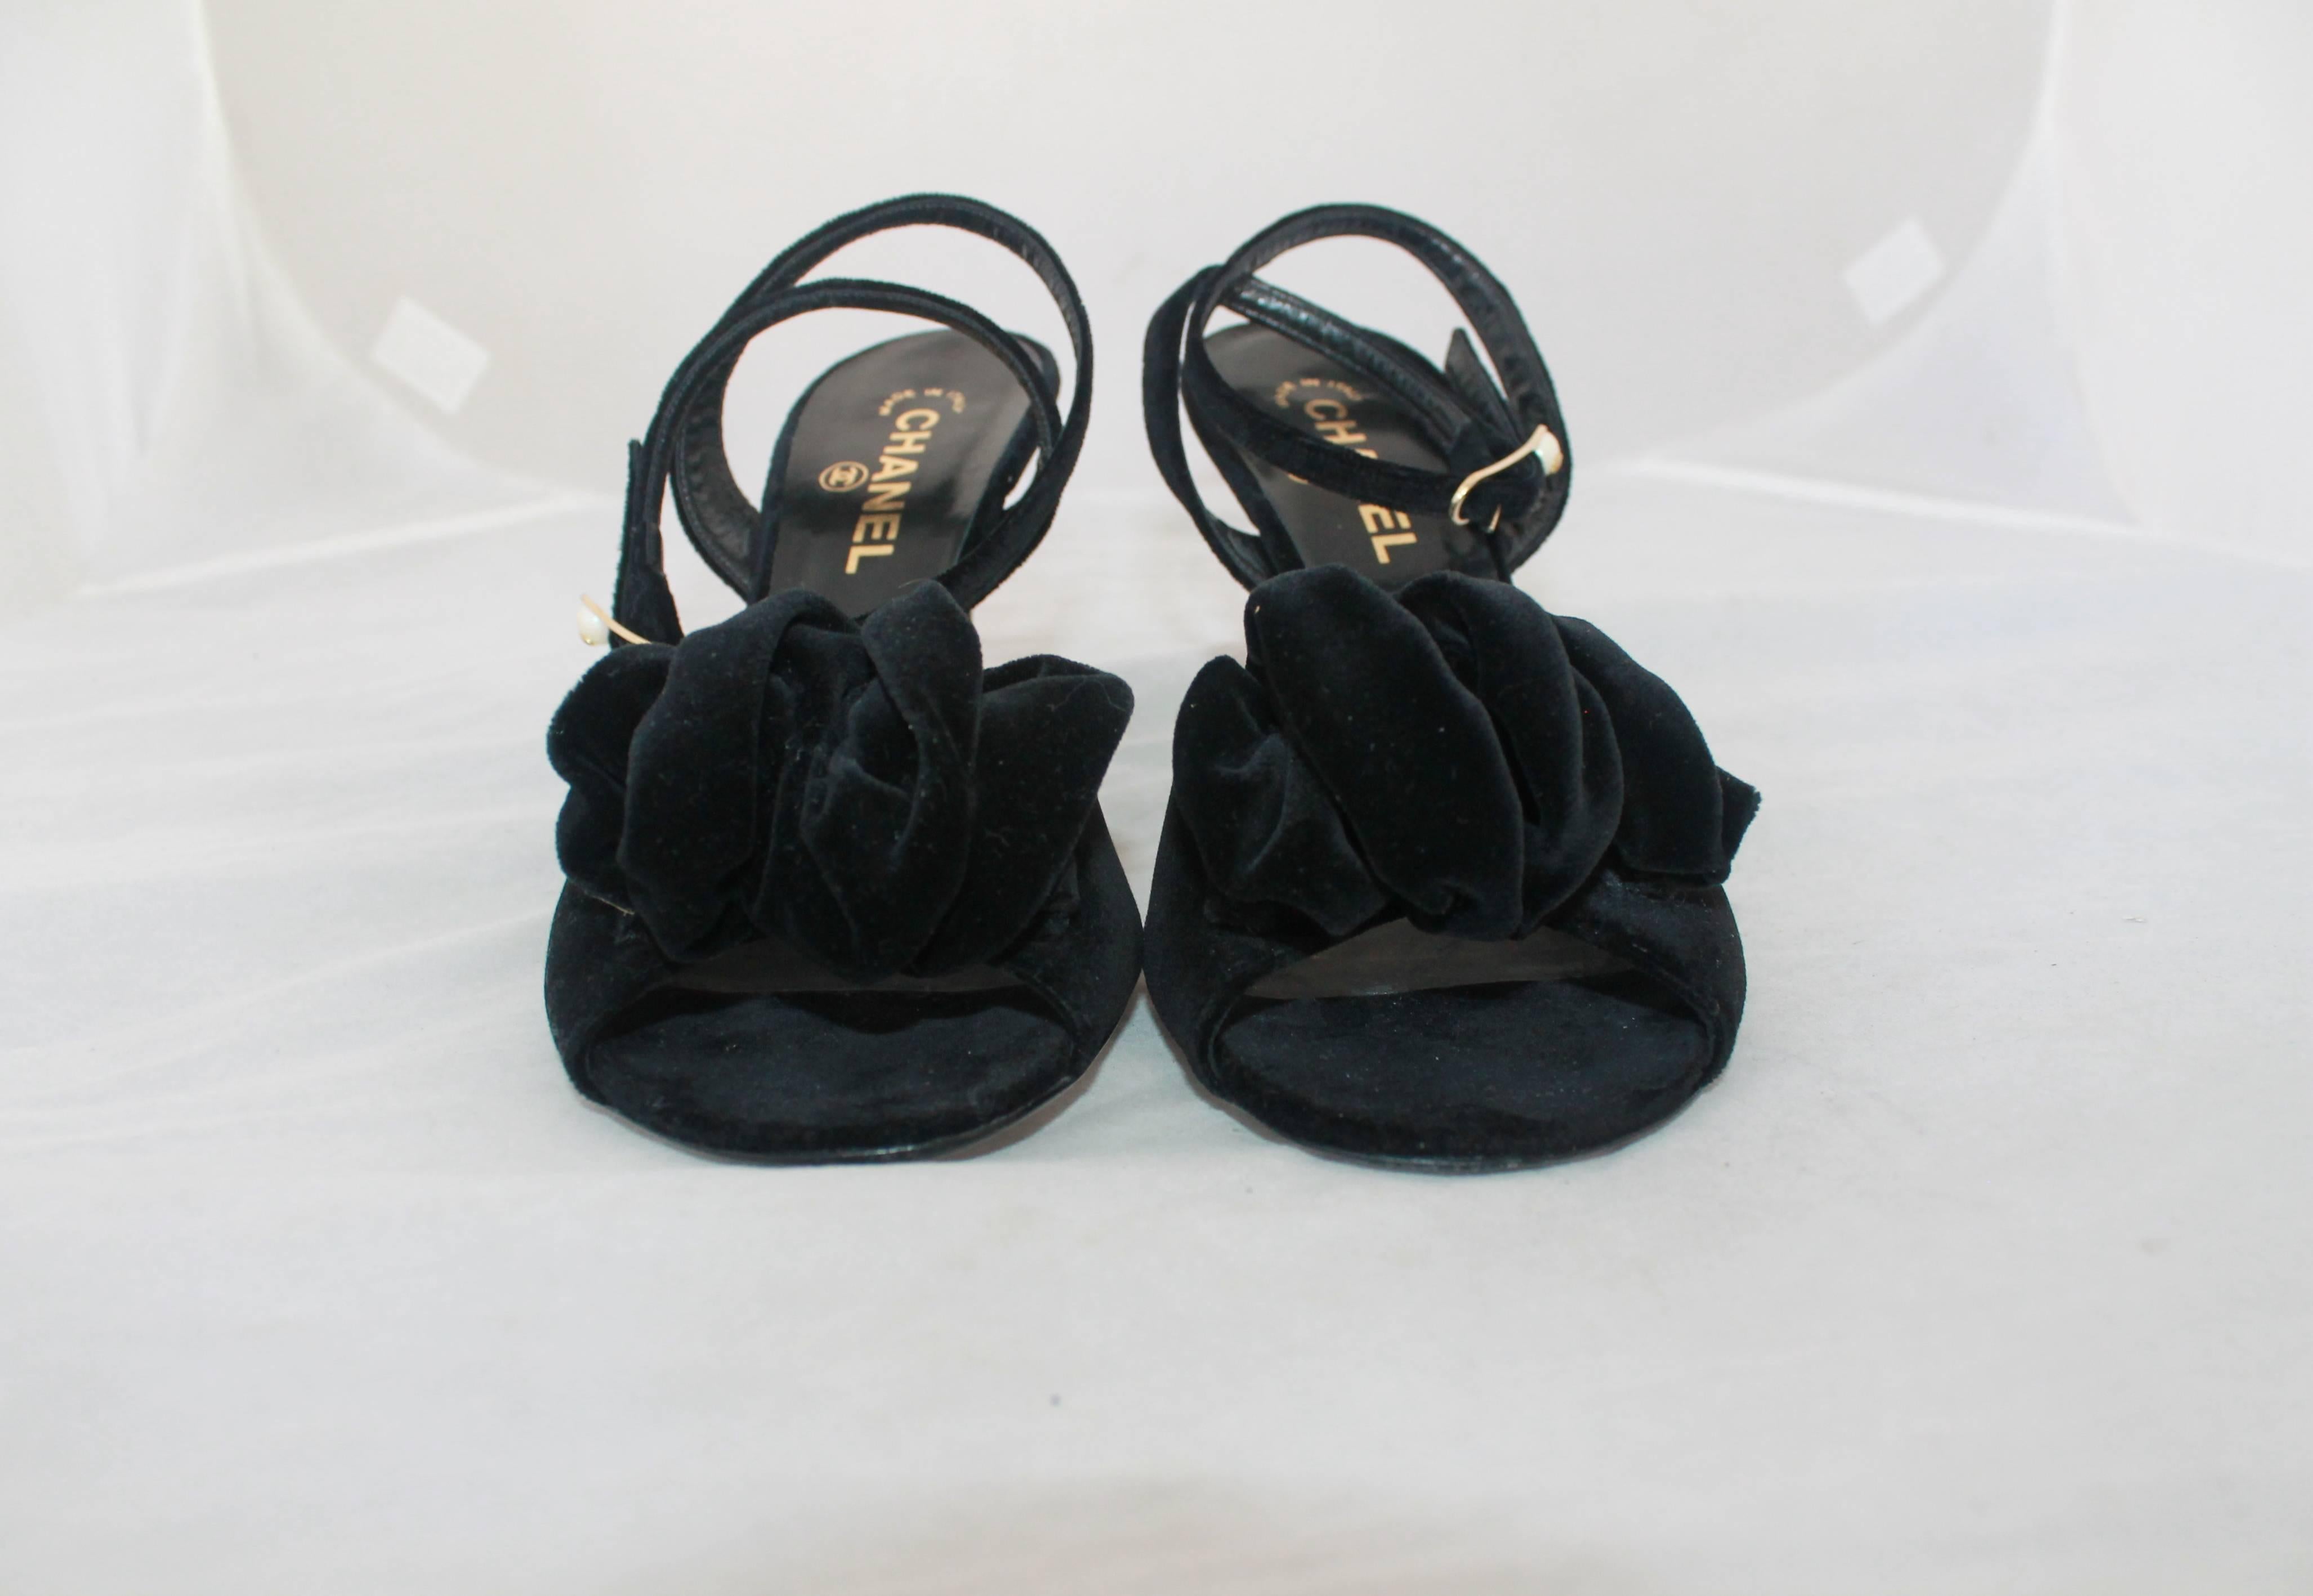 Chanel Black Velvet Open-Toe Strappy Heel w/ Floral Cluster - 39.5.  These elegant heels are in excellent condition with minor wear to the sole.  They have a crisscross styled ankle strap with a pearl with  